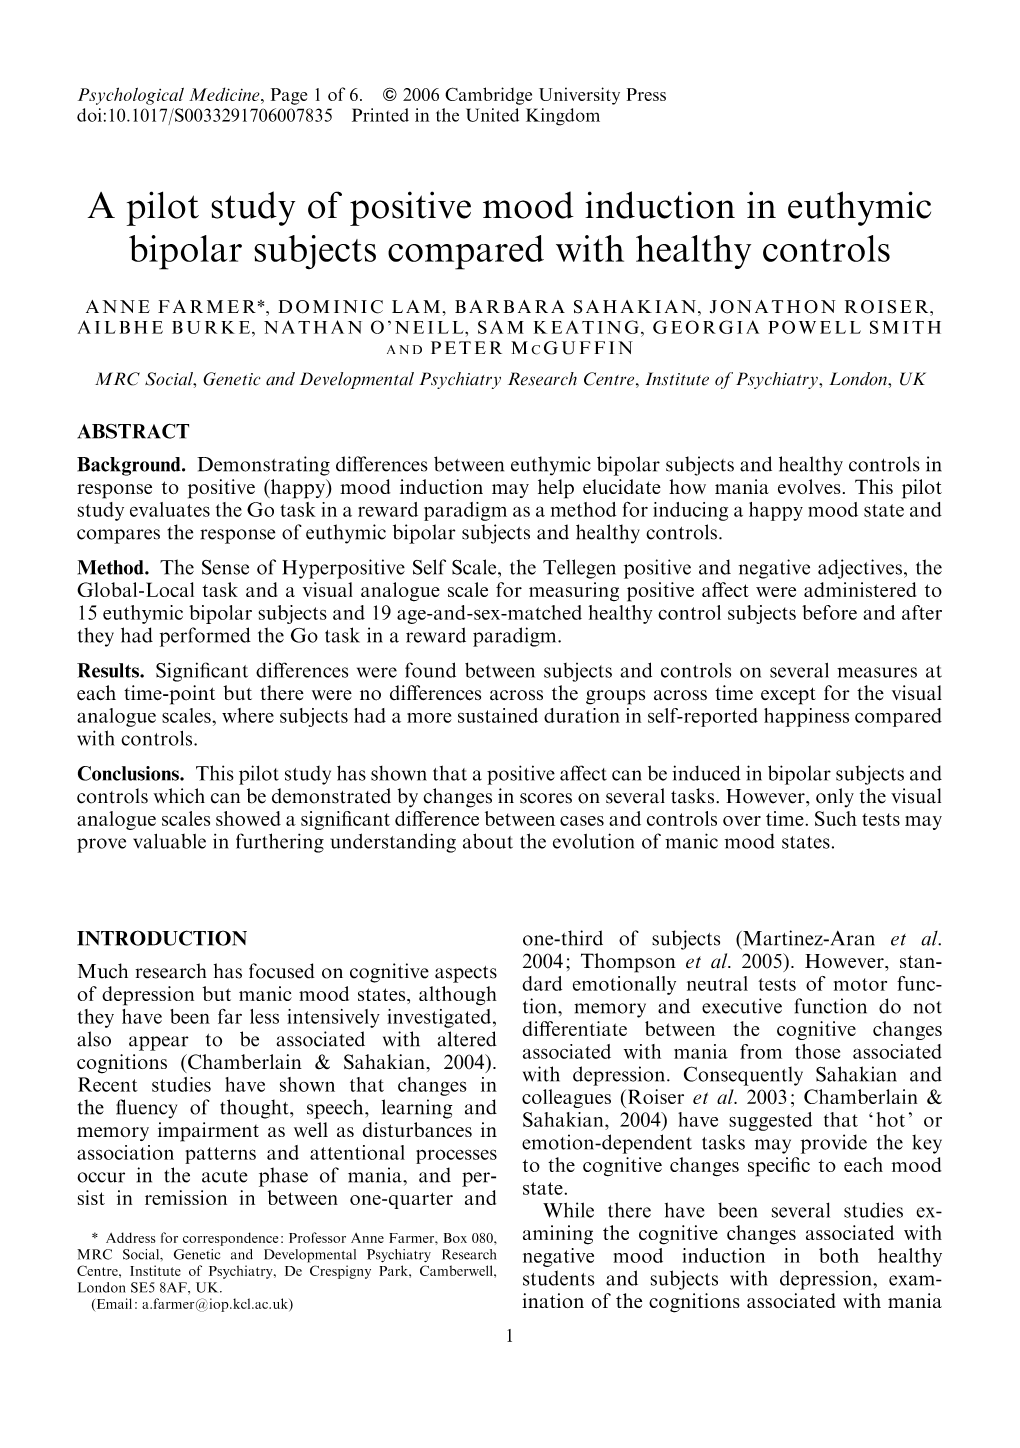 A Pilot Study of Positive Mood Induction in Euthymic Bipolar Subjects Compared with Healthy Controls